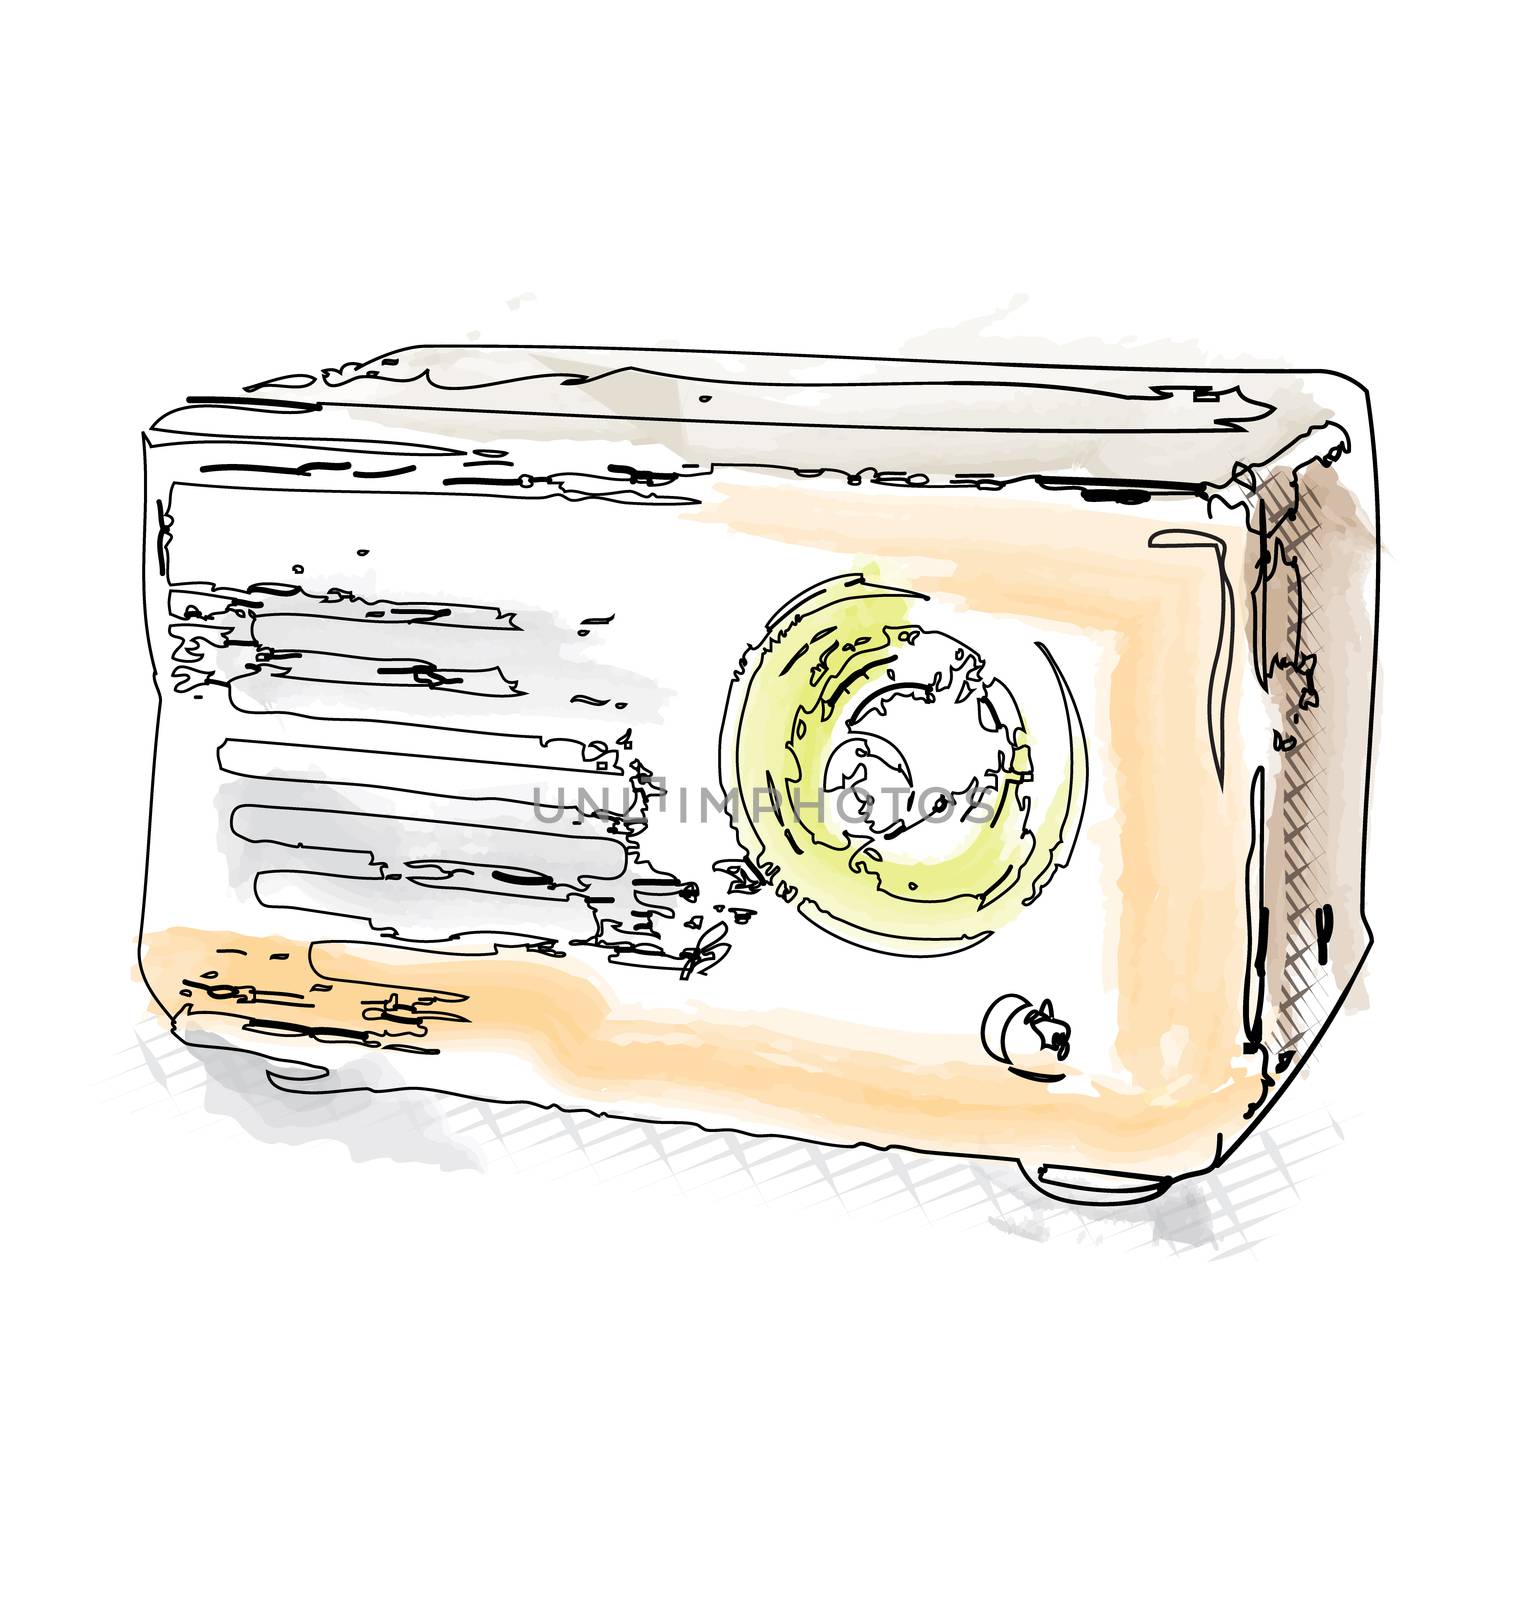 Retro radio illustration in watercolor style by stocklady